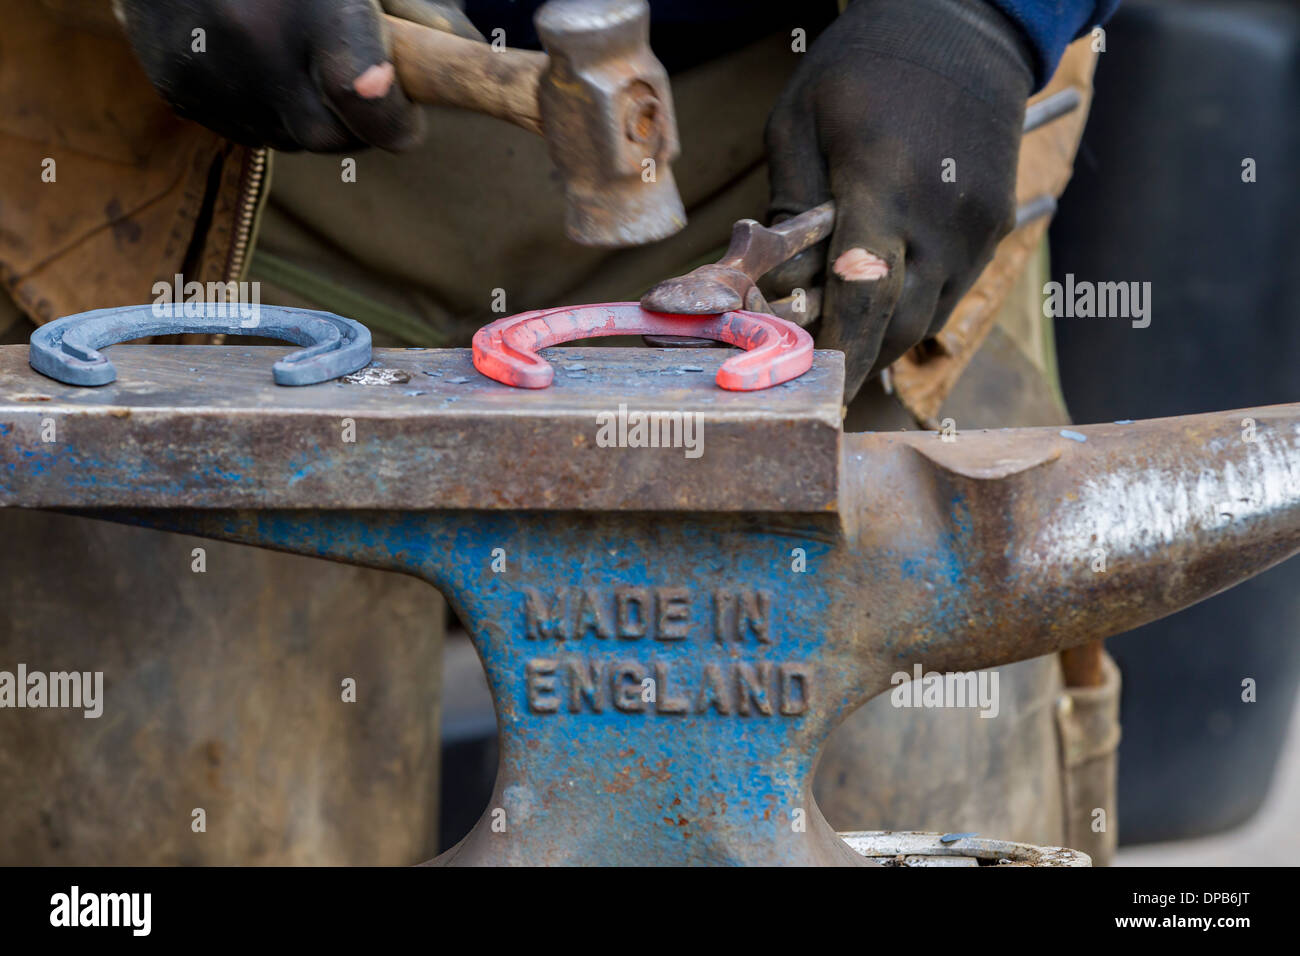 Farrier hammering red hot glowing horseshoe on anvil. Stock Photo